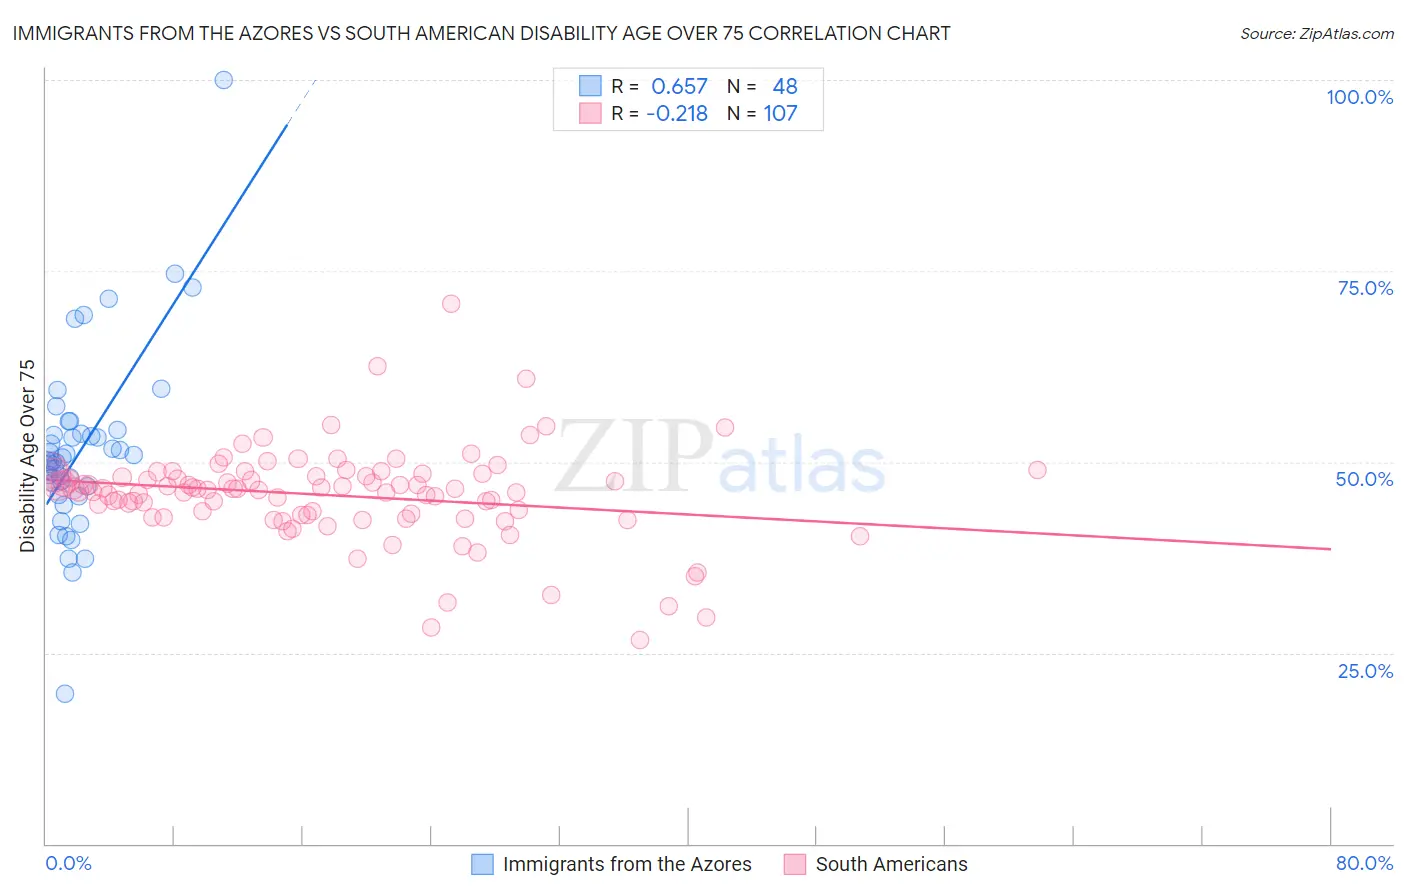 Immigrants from the Azores vs South American Disability Age Over 75